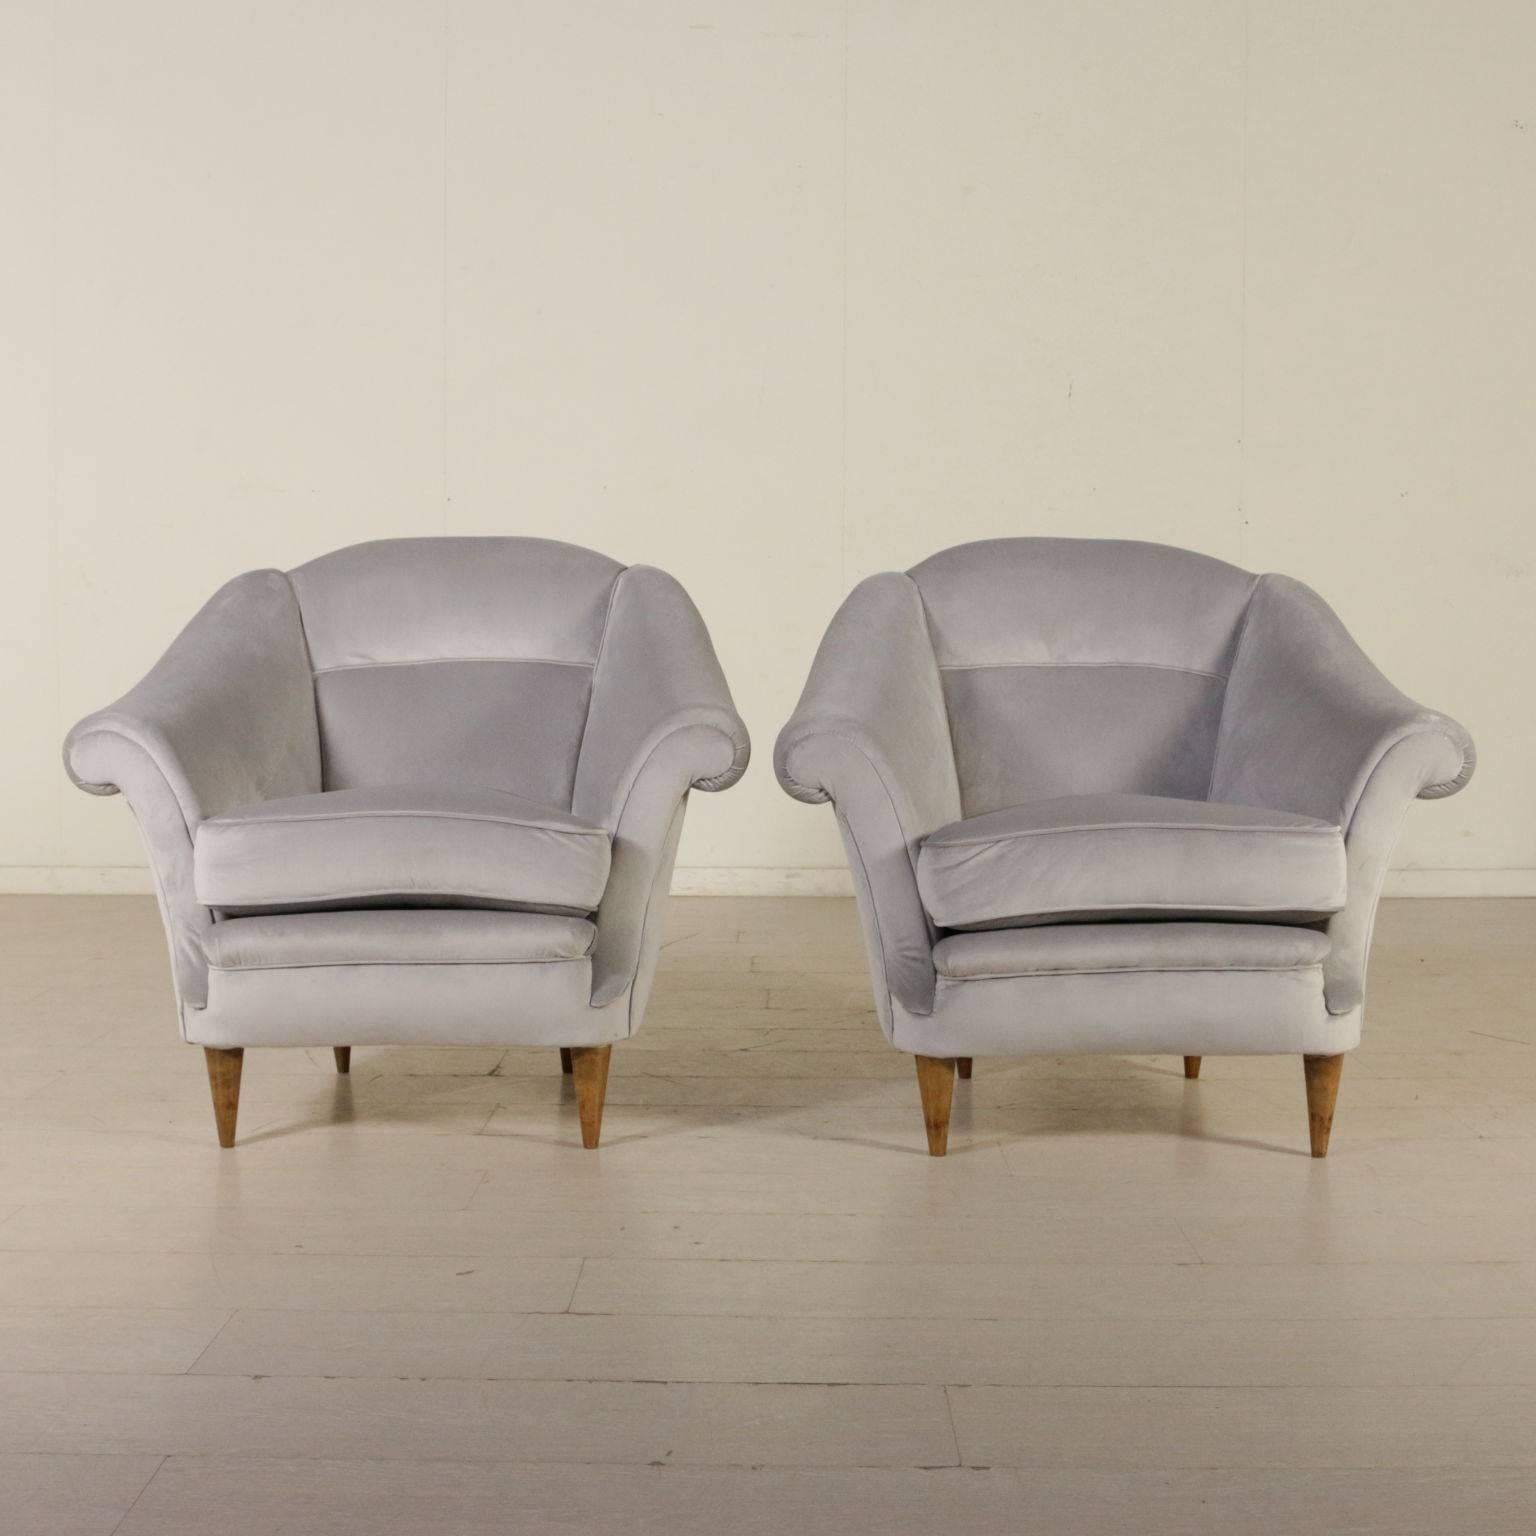 A pair of armchairs, springs padding, velvet upholstery. Manufactured in Italy, 1940s-1950s.